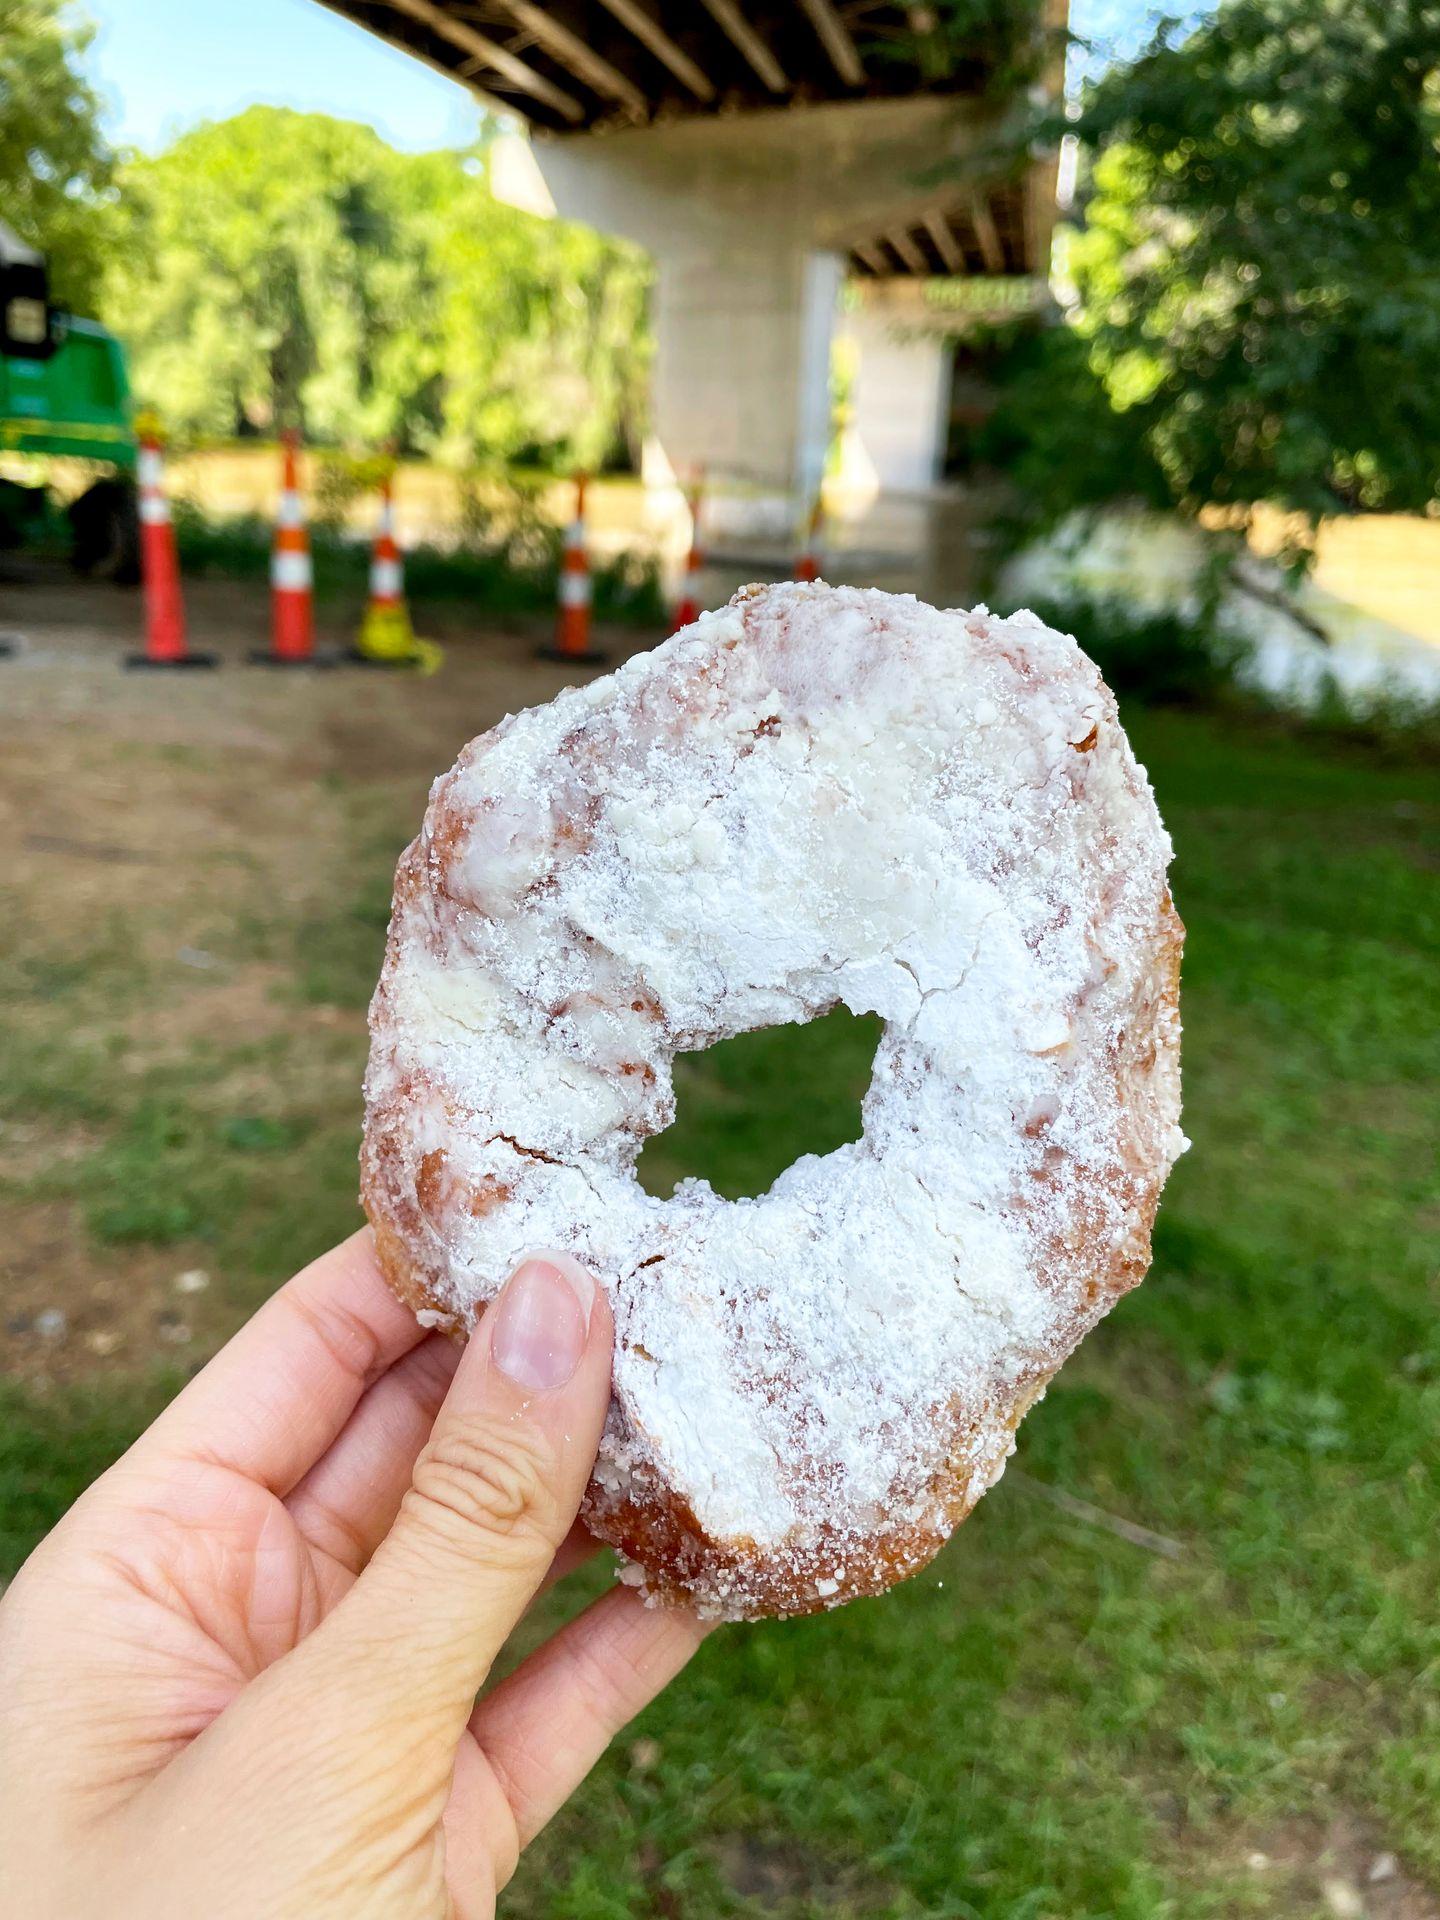 Holding up a powdered sugar donut from Hole Doughnuts.